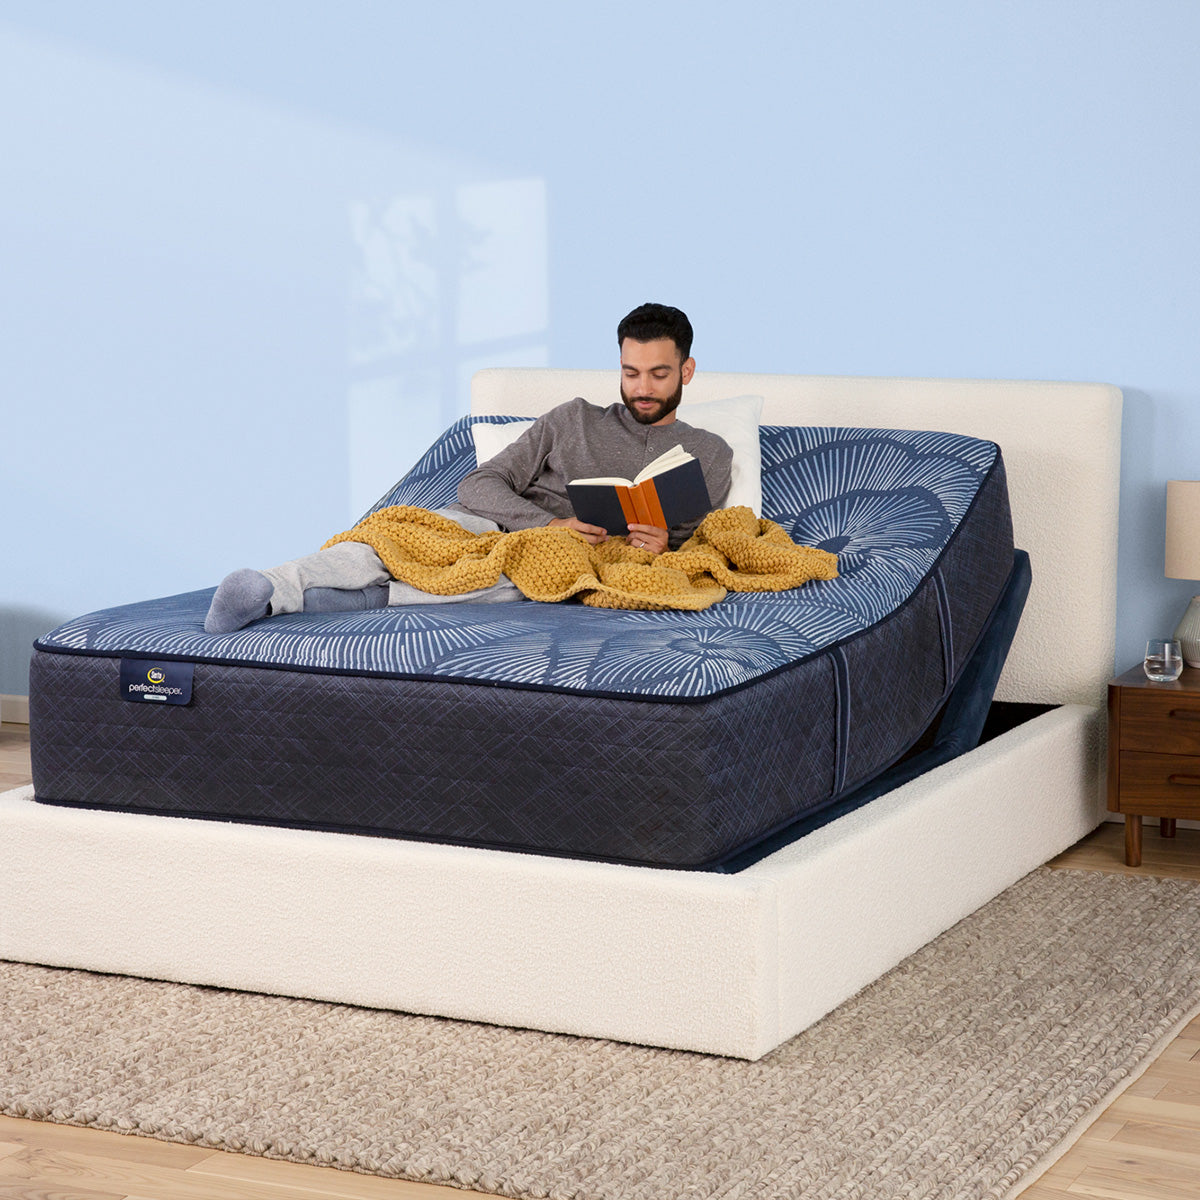 Man laying on mattress elevated by a Serta Motion Essentials Adjustable Base